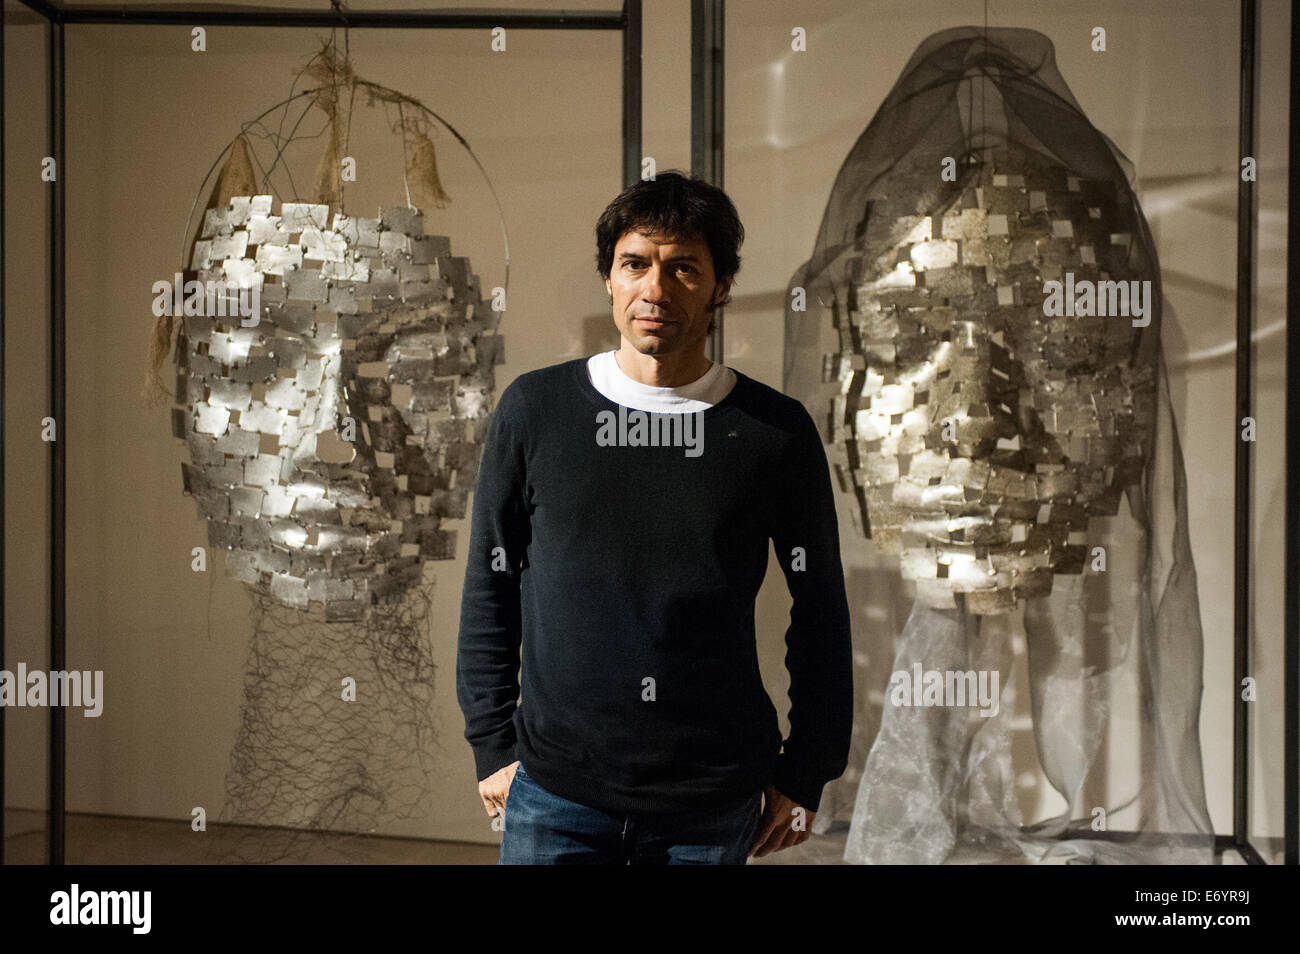 London, UK. 2nd Sept, 2014. Artist Xavier Mascaró poses next to his works 'Masks'. Xavier Mascaró's first UK solo exhibition will run from 3 September until 5 October at Saatchi Gallery. Credit:  Piero Cruciatti/Alamy Live News Stock Photo